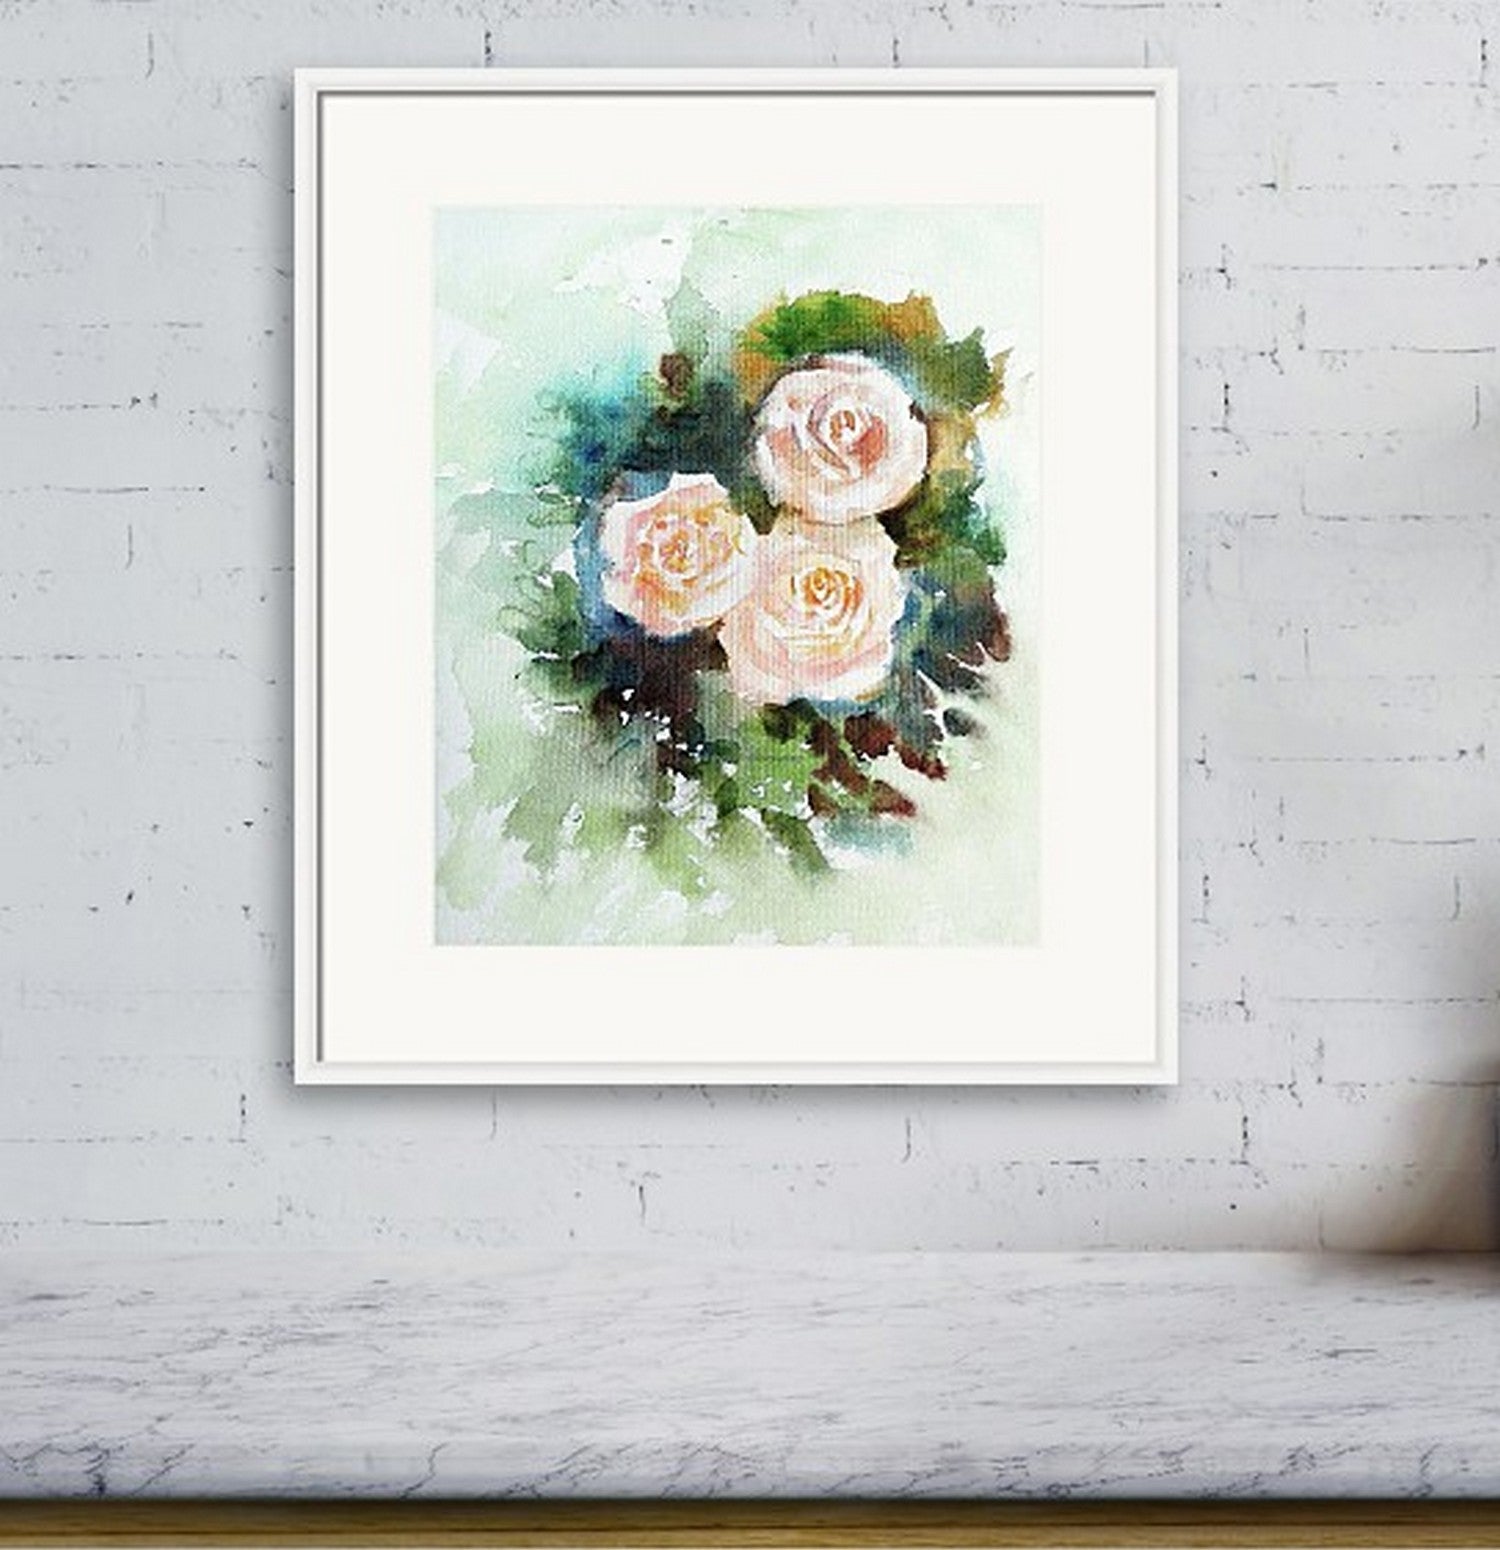 Virtual framed view Three Cream roses, Beautiful flower painting, Floral gift